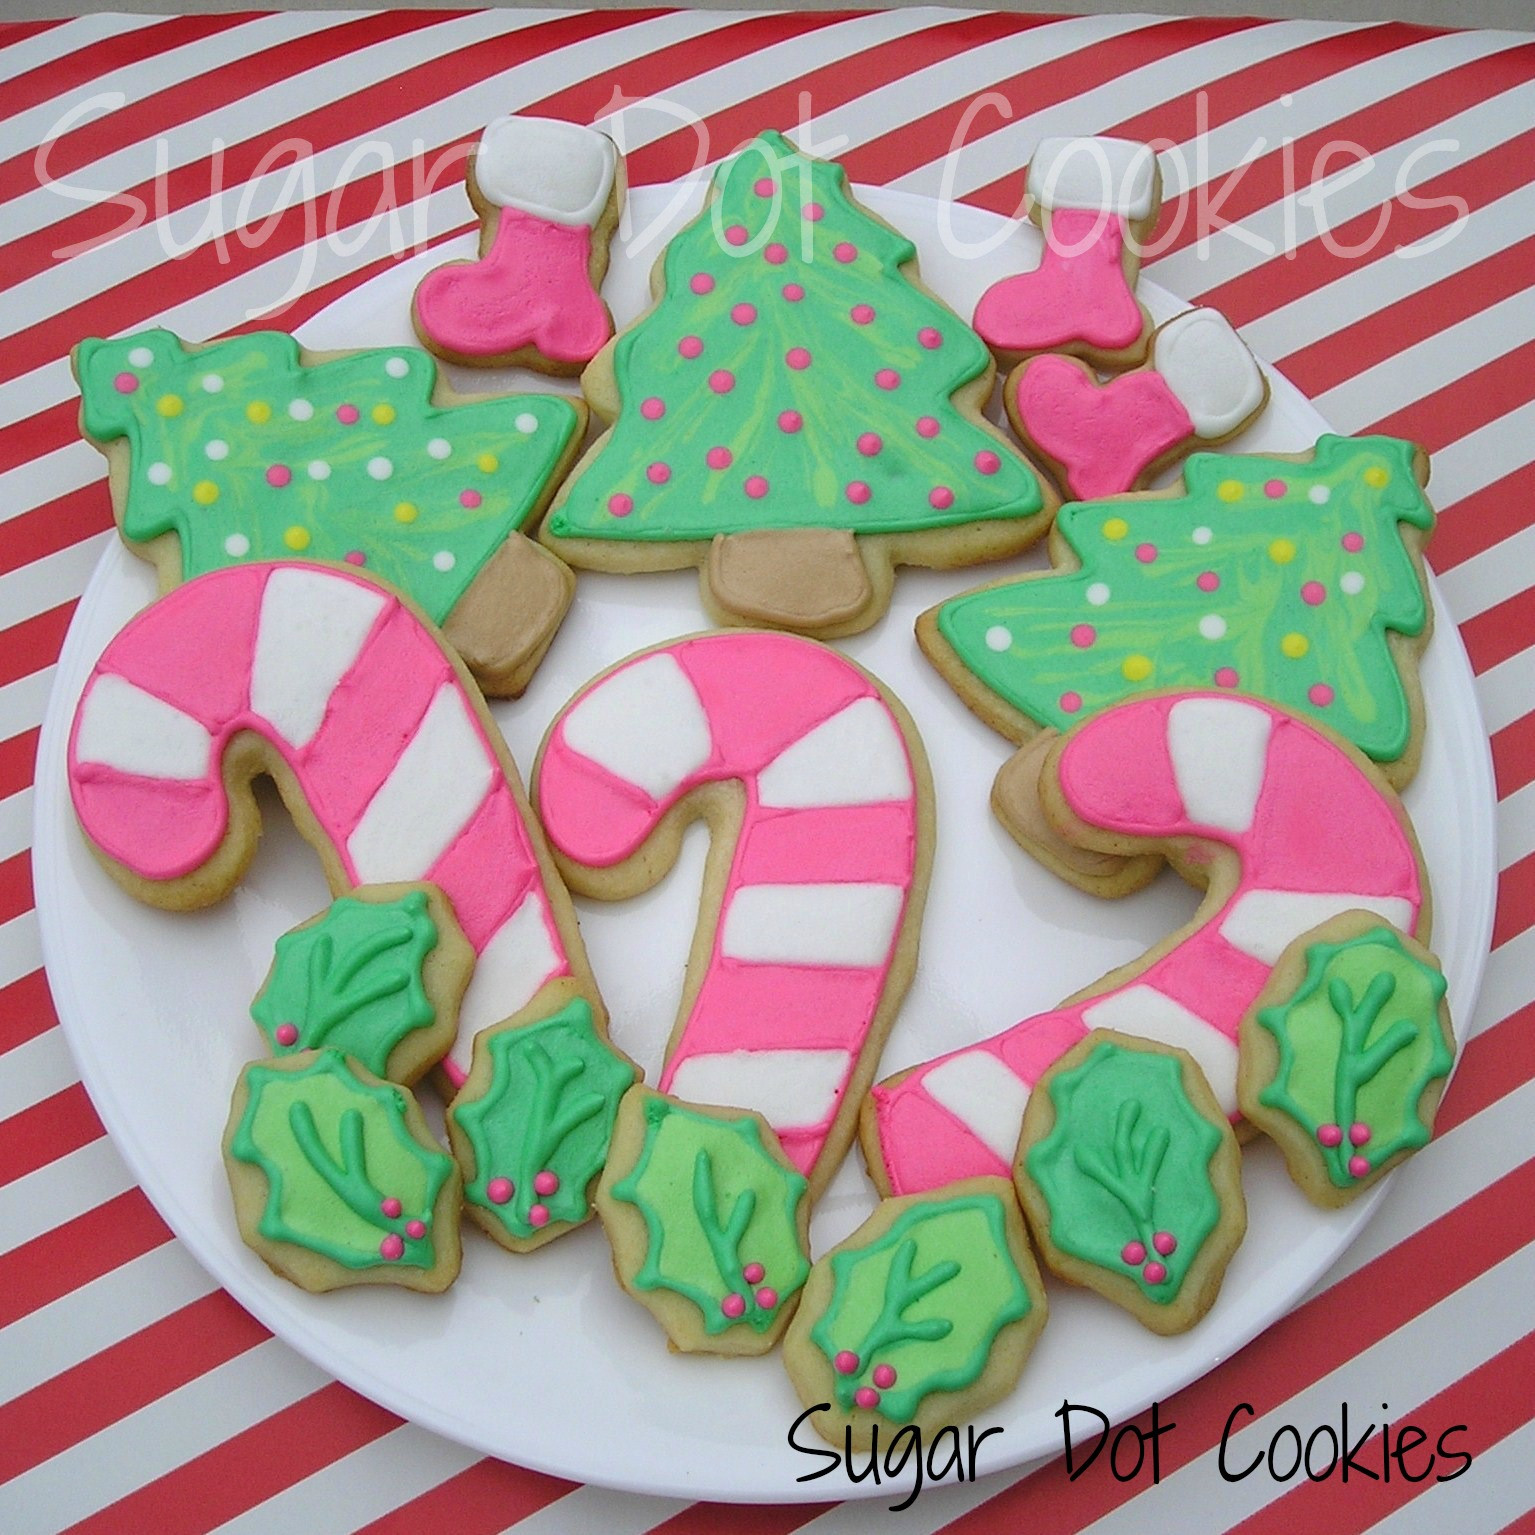 Christmas Sugar Cookies With Icing
 Would you like to see last year s collection My first